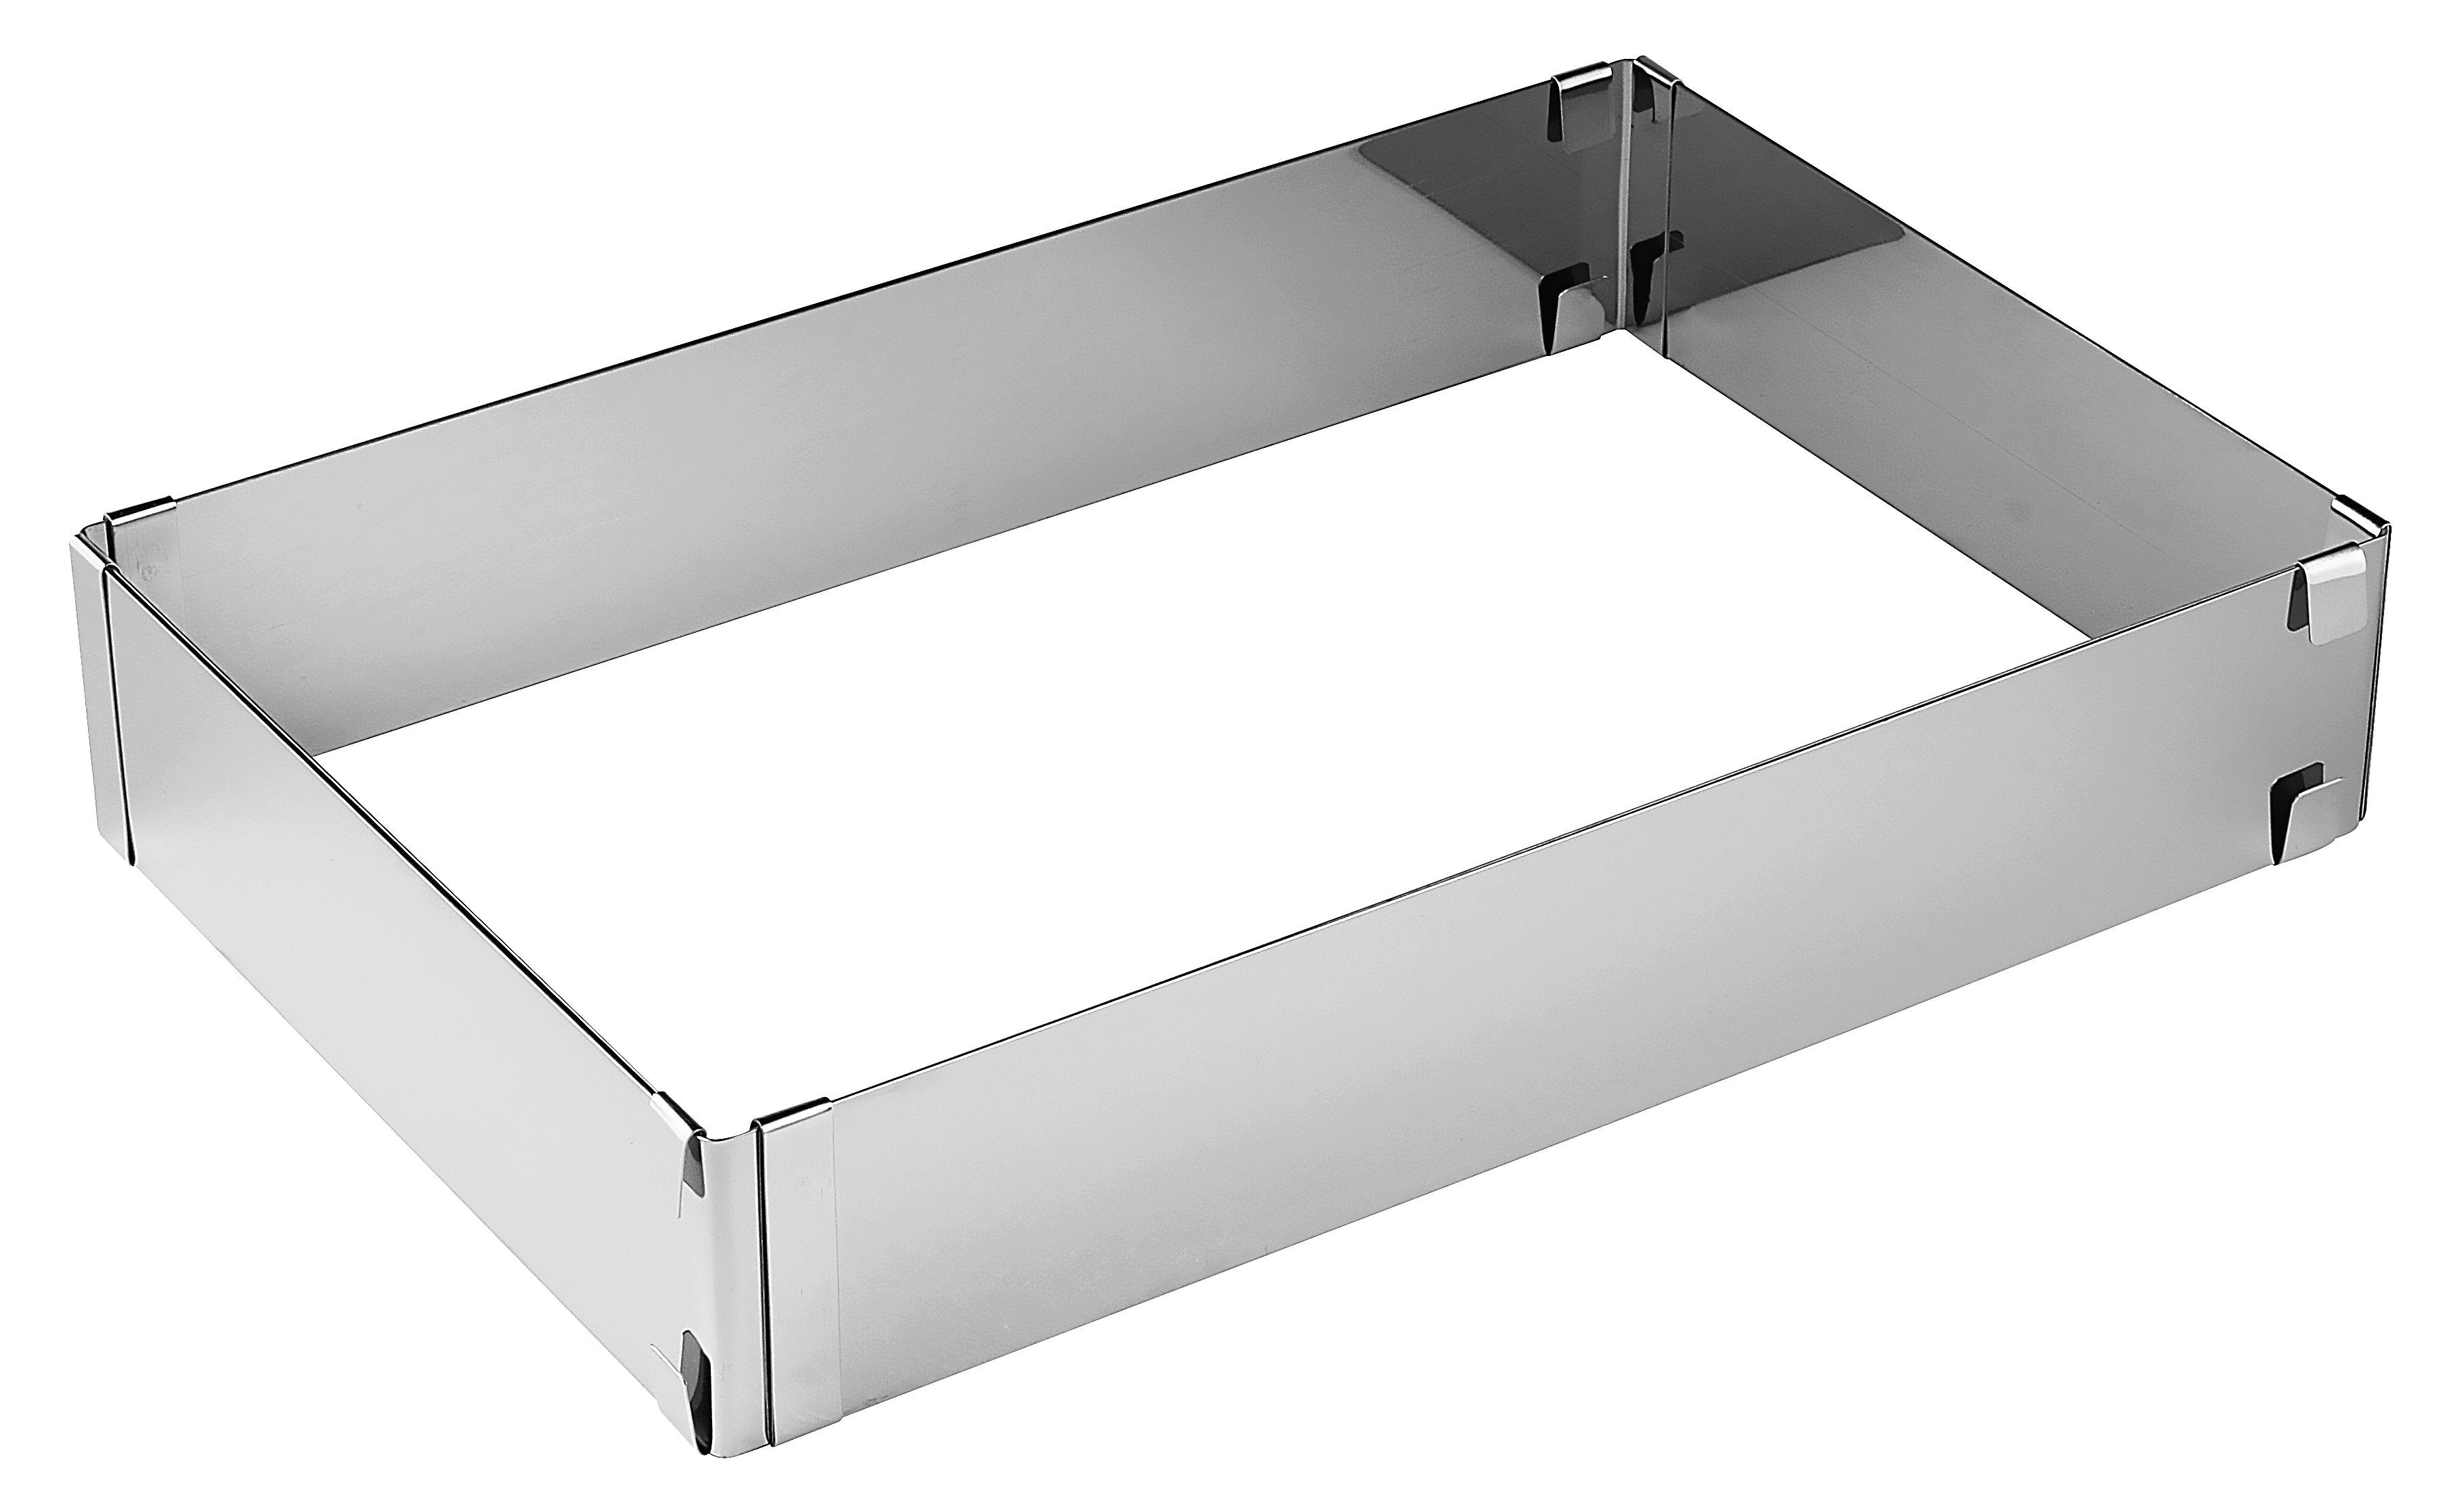 Zenker Baking Frame Adjustable, "Patisserie", Stainless Steel, 18.5-34X27.5-52X5 Cm - Whole and All